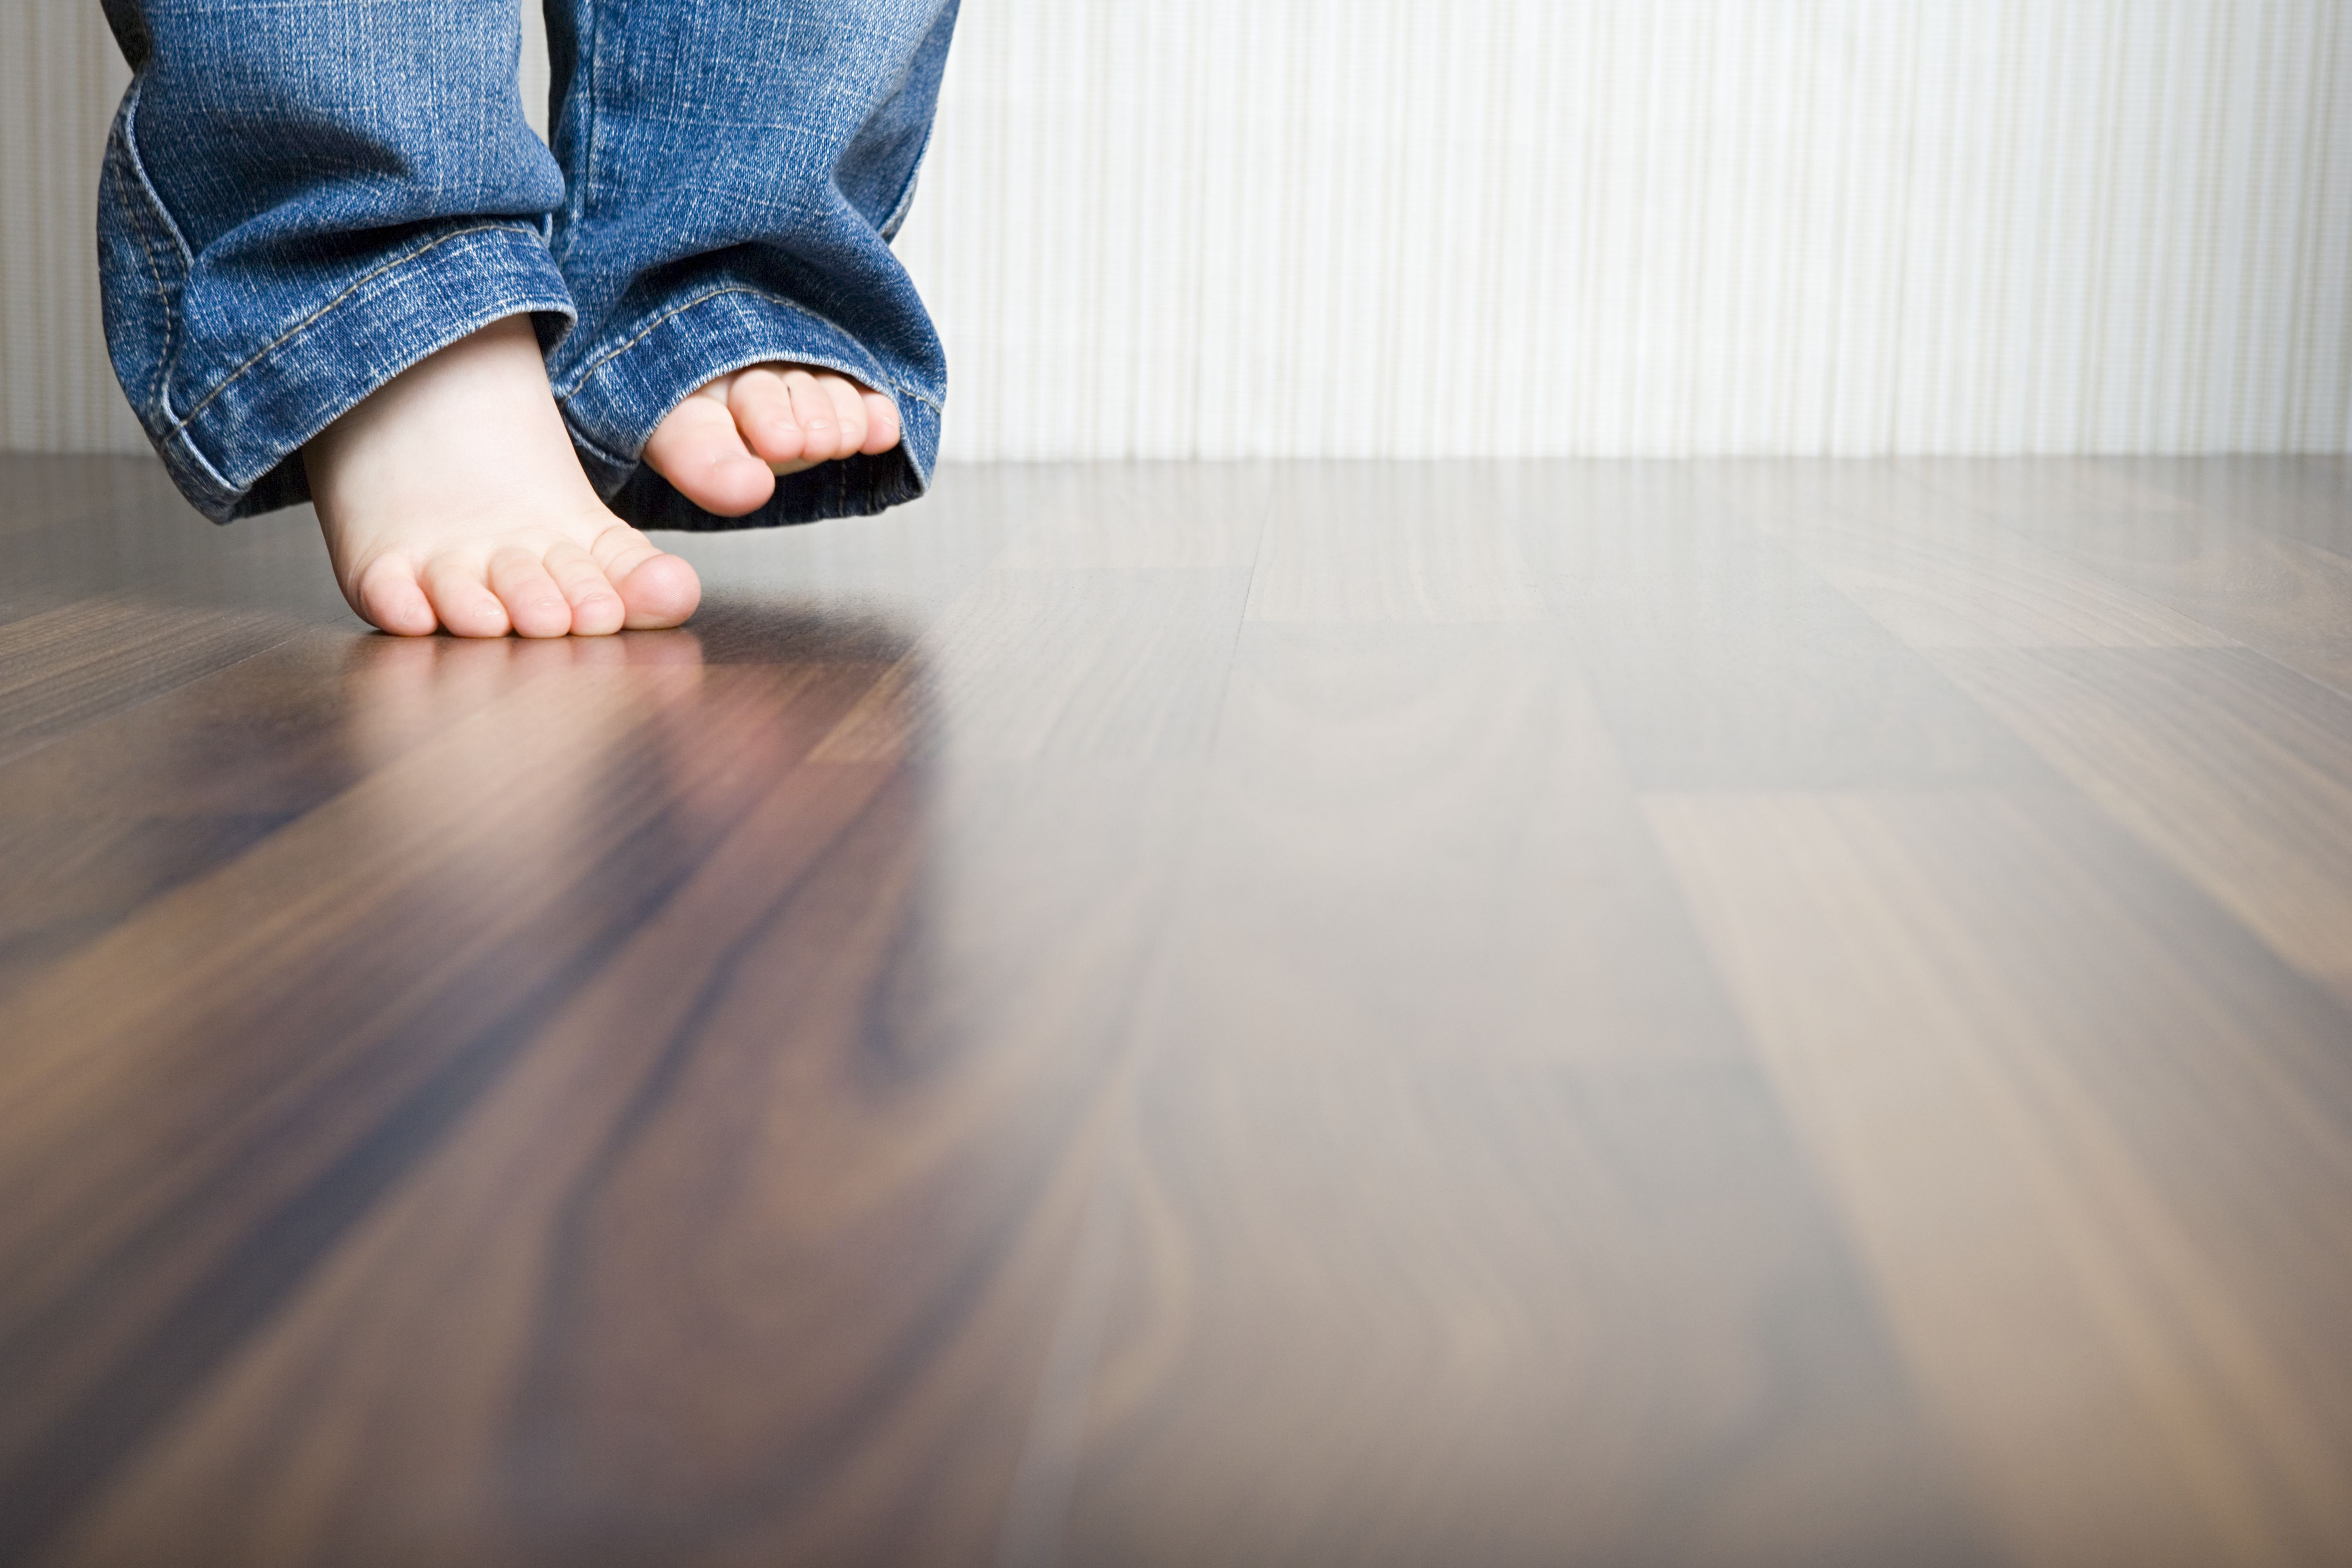 Quality Hardwood Floors Inc Of How to Clean Hardwood Floors Best Way to Clean Wood Flooring within 1512149908 Gettyimages 75403973